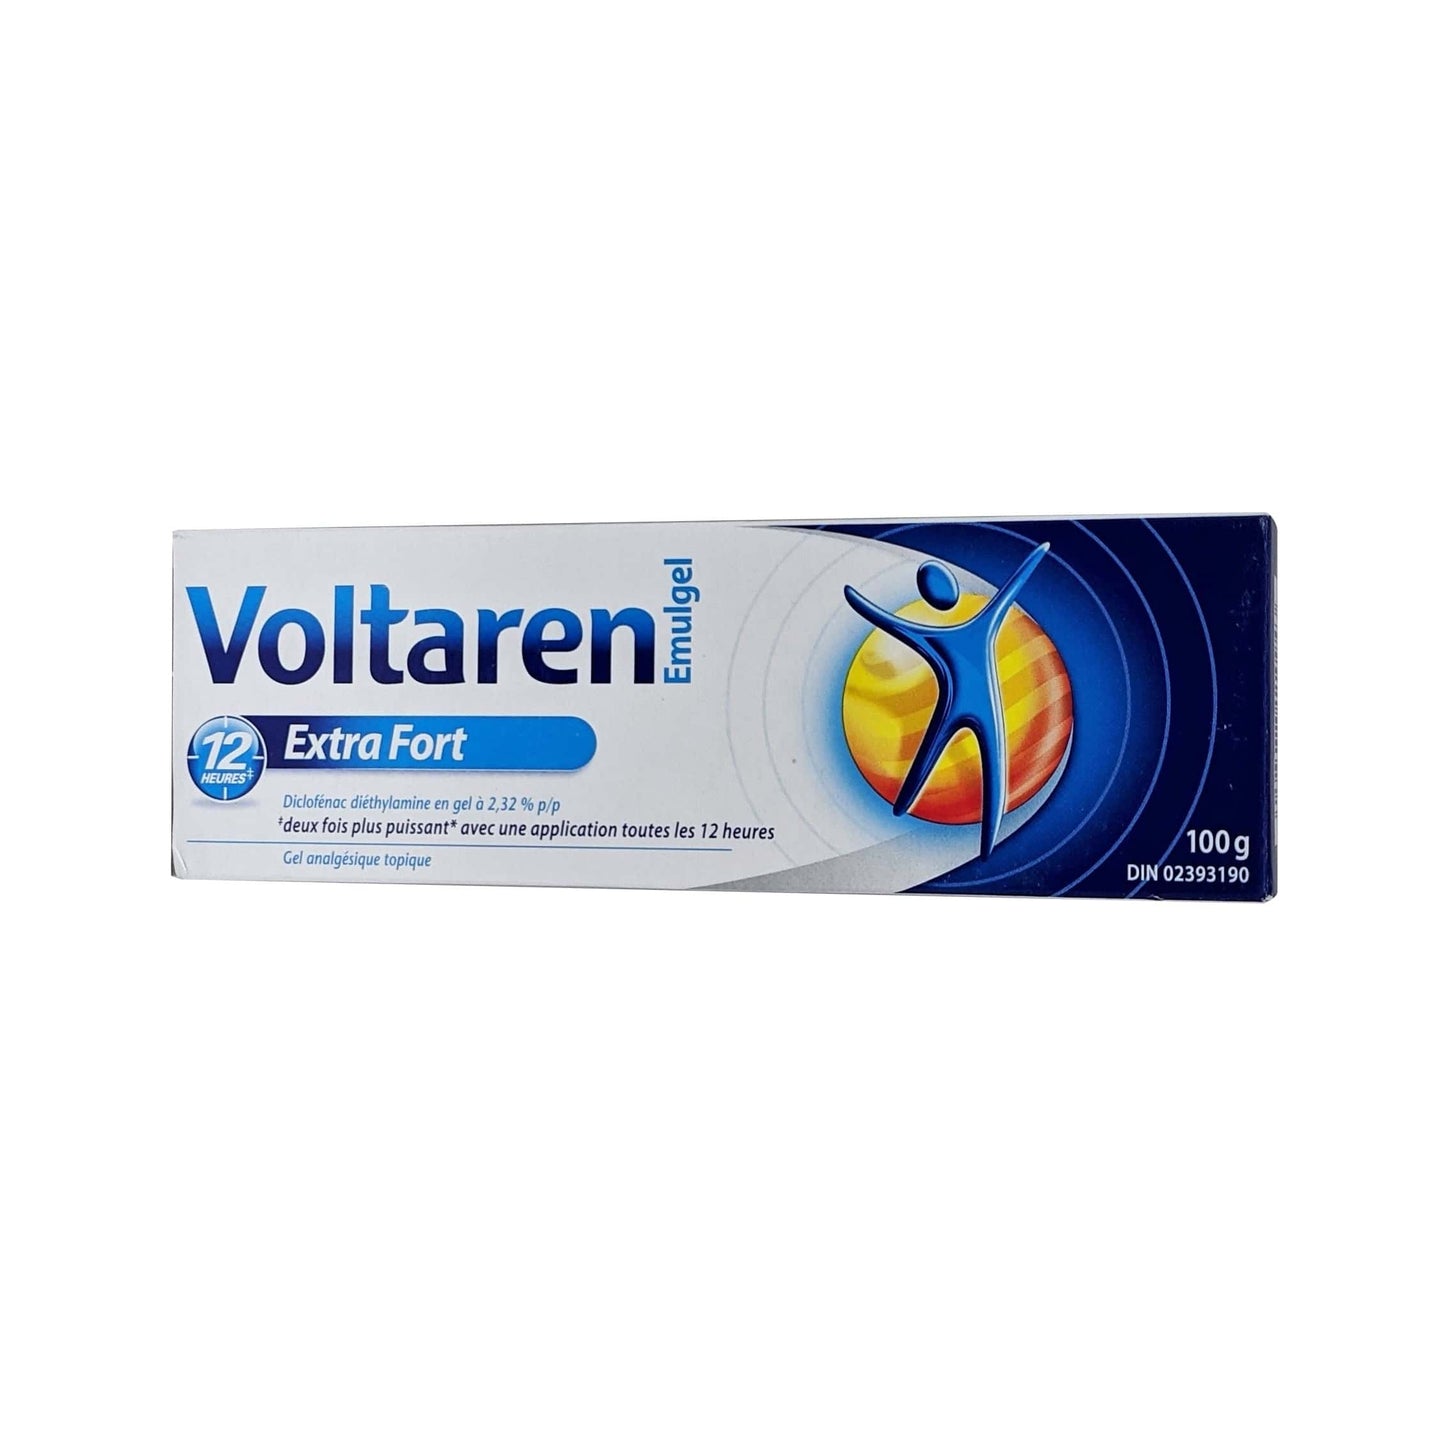 Product label for Voltaren Emulgel Extra Strength Gel 100g in French